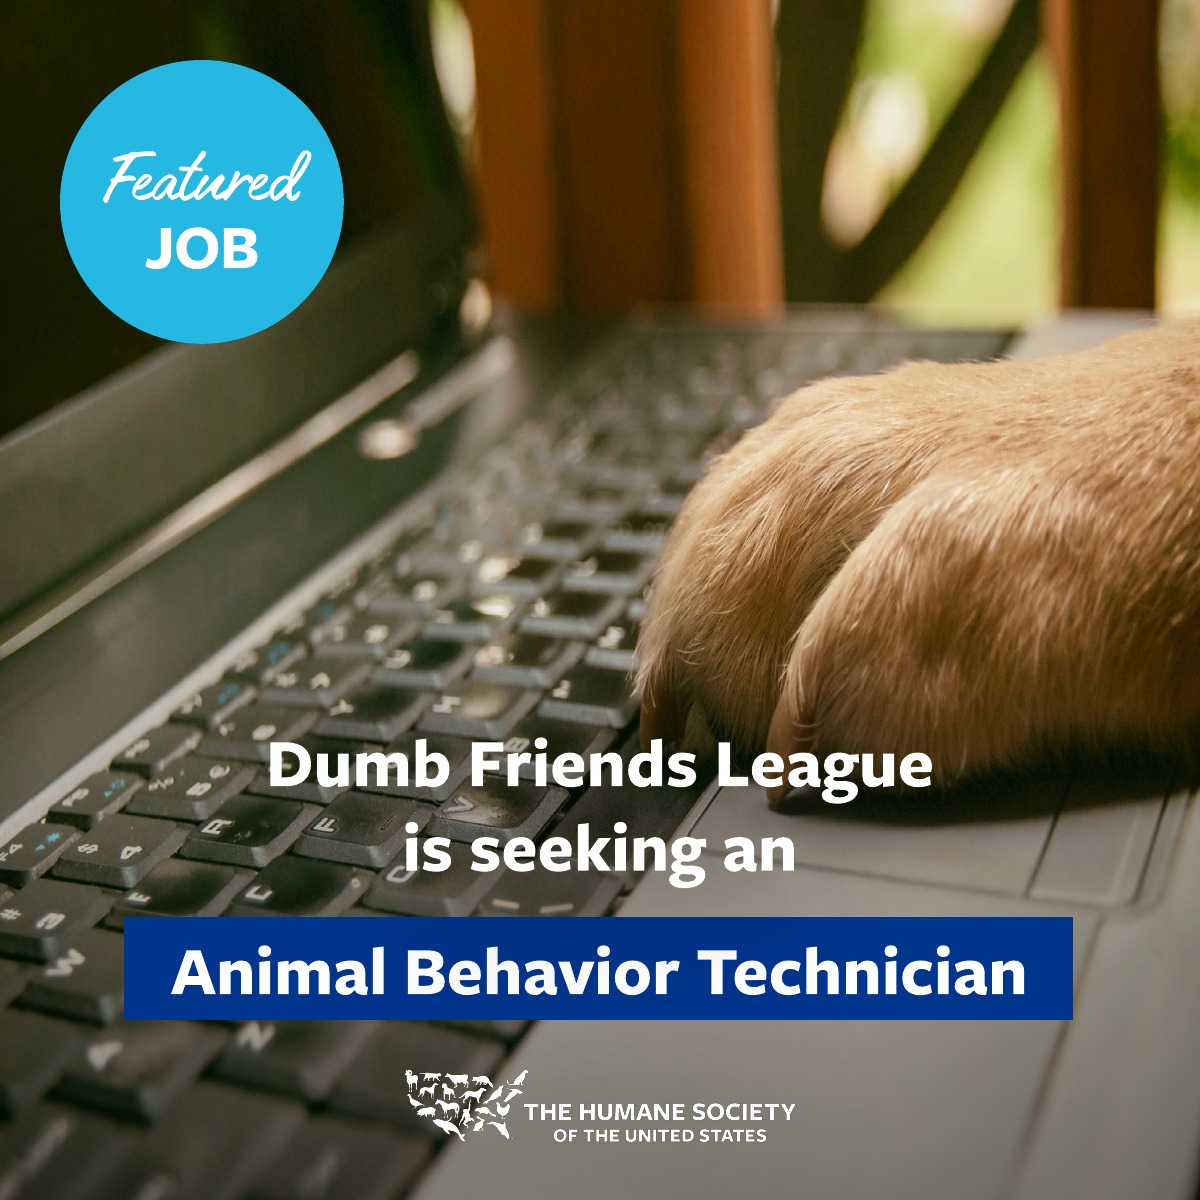 Today we're highlighting the animal behavior technician position at the Dumb Friends League (@DDFL) in Denver, CO. This is a full-time position with an salary range of $20.00-$20.90 per hour. Learn more and apply by September 15, 2023 at: bit.ly/3XTZkyW.